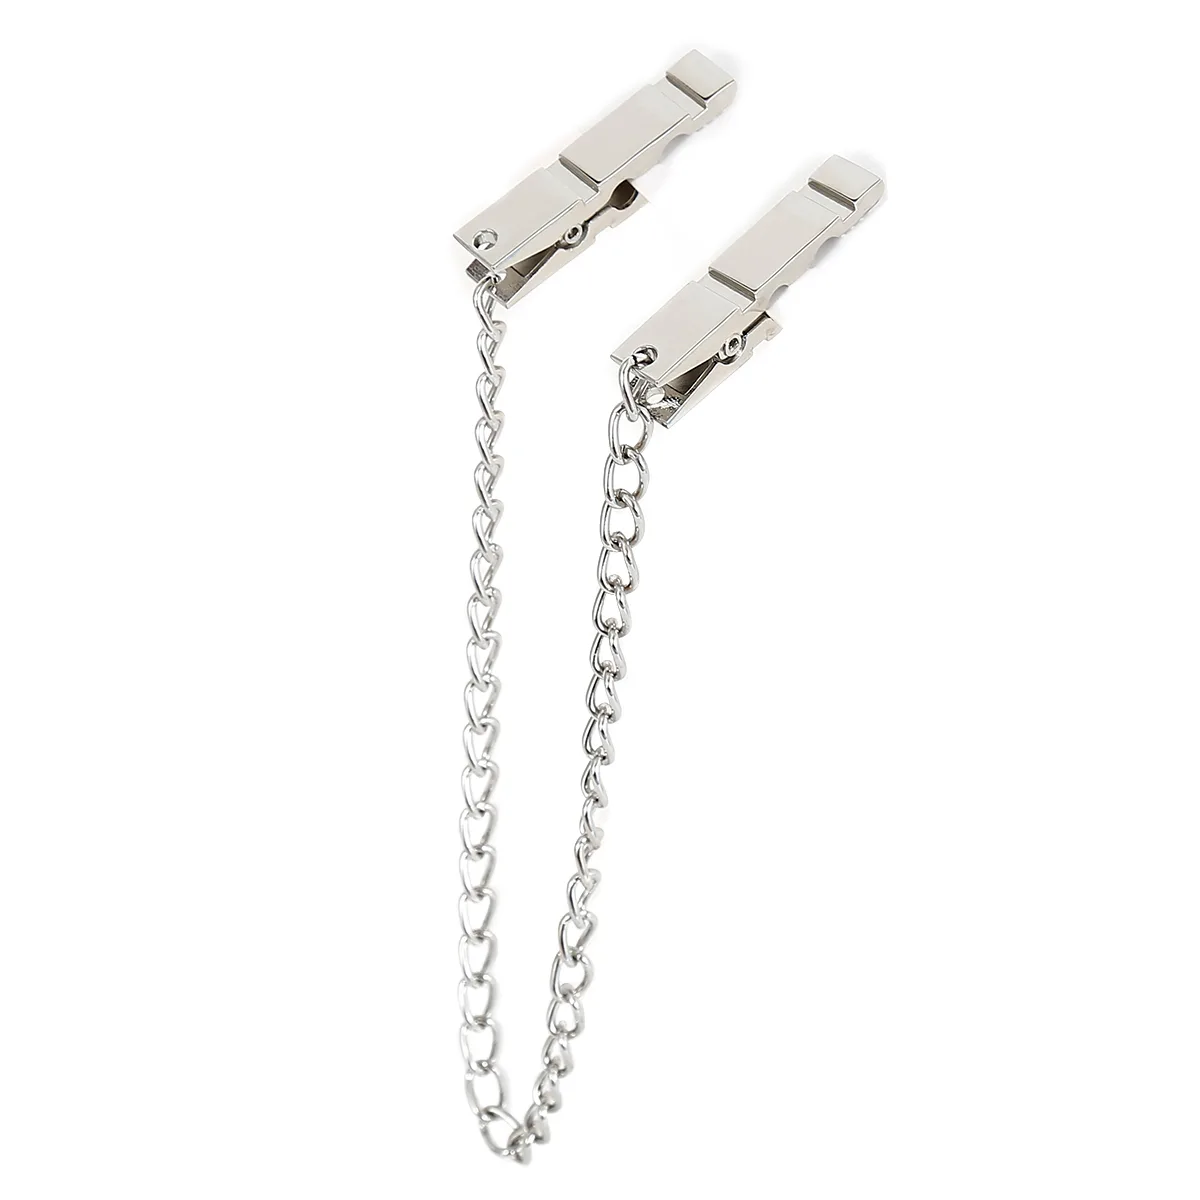 Modern-Zinc-Alloy-Nipple-Clamps-with-Chain-OPR-321143-3